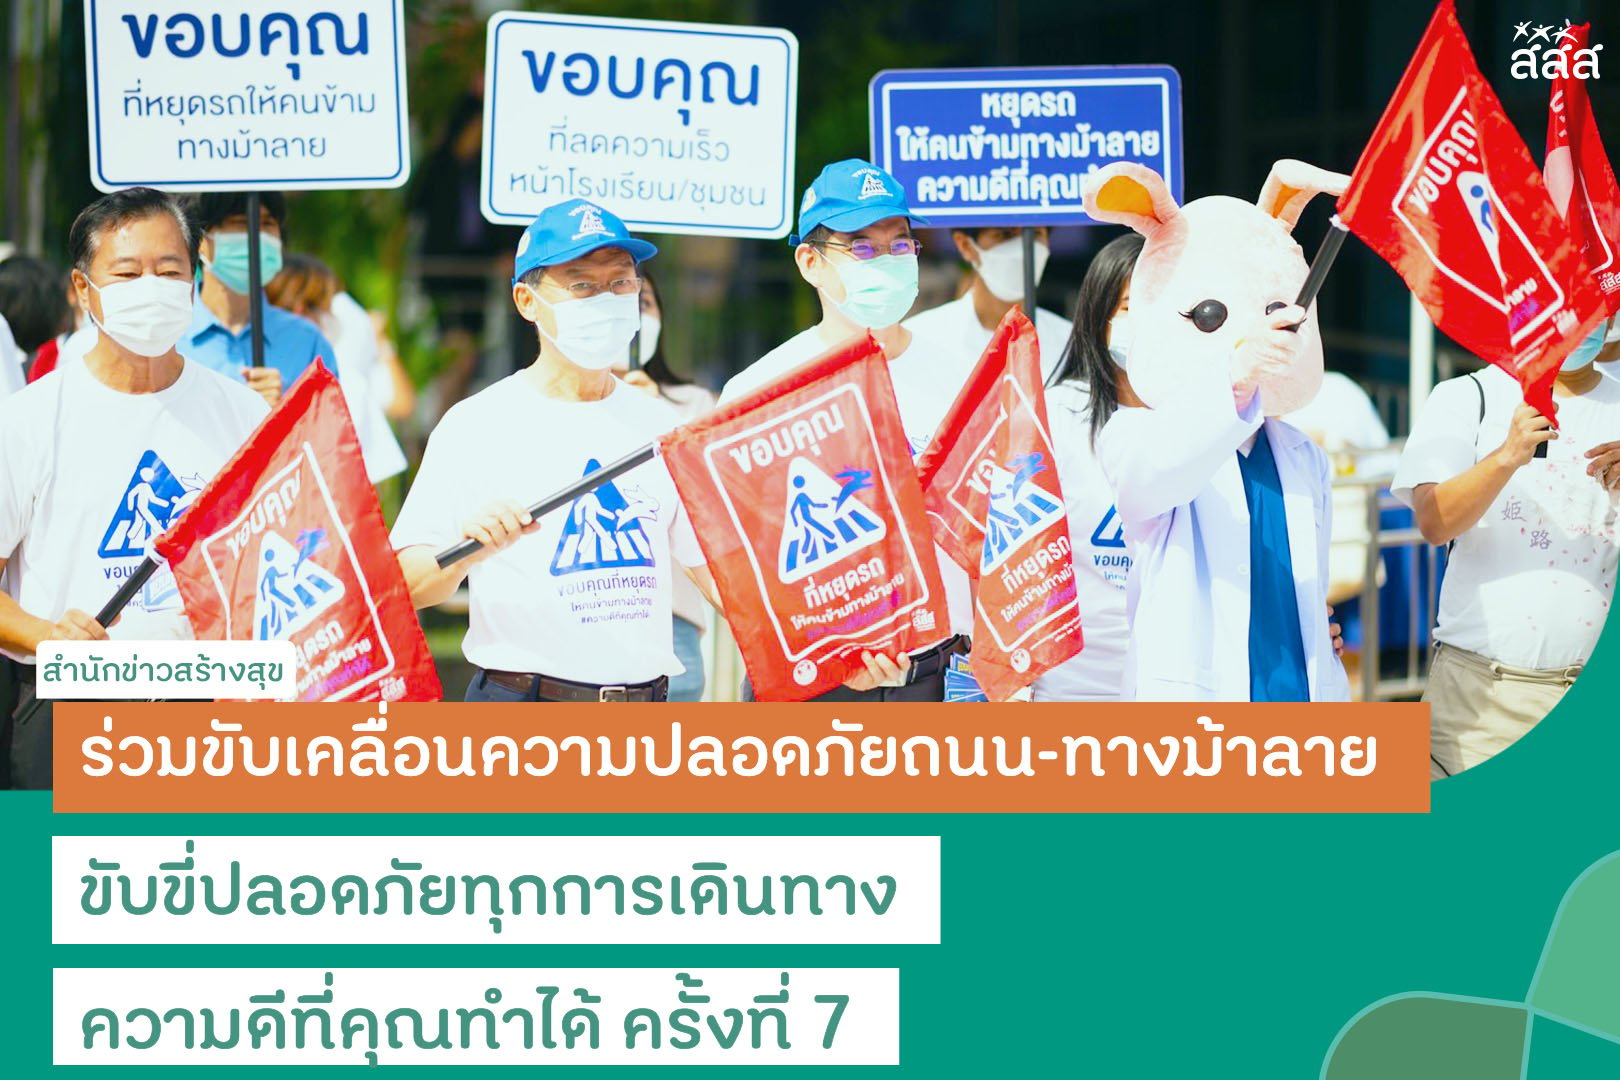 ThaiHealth and the senate promote the use of zebra crossing and road safety thaihealth